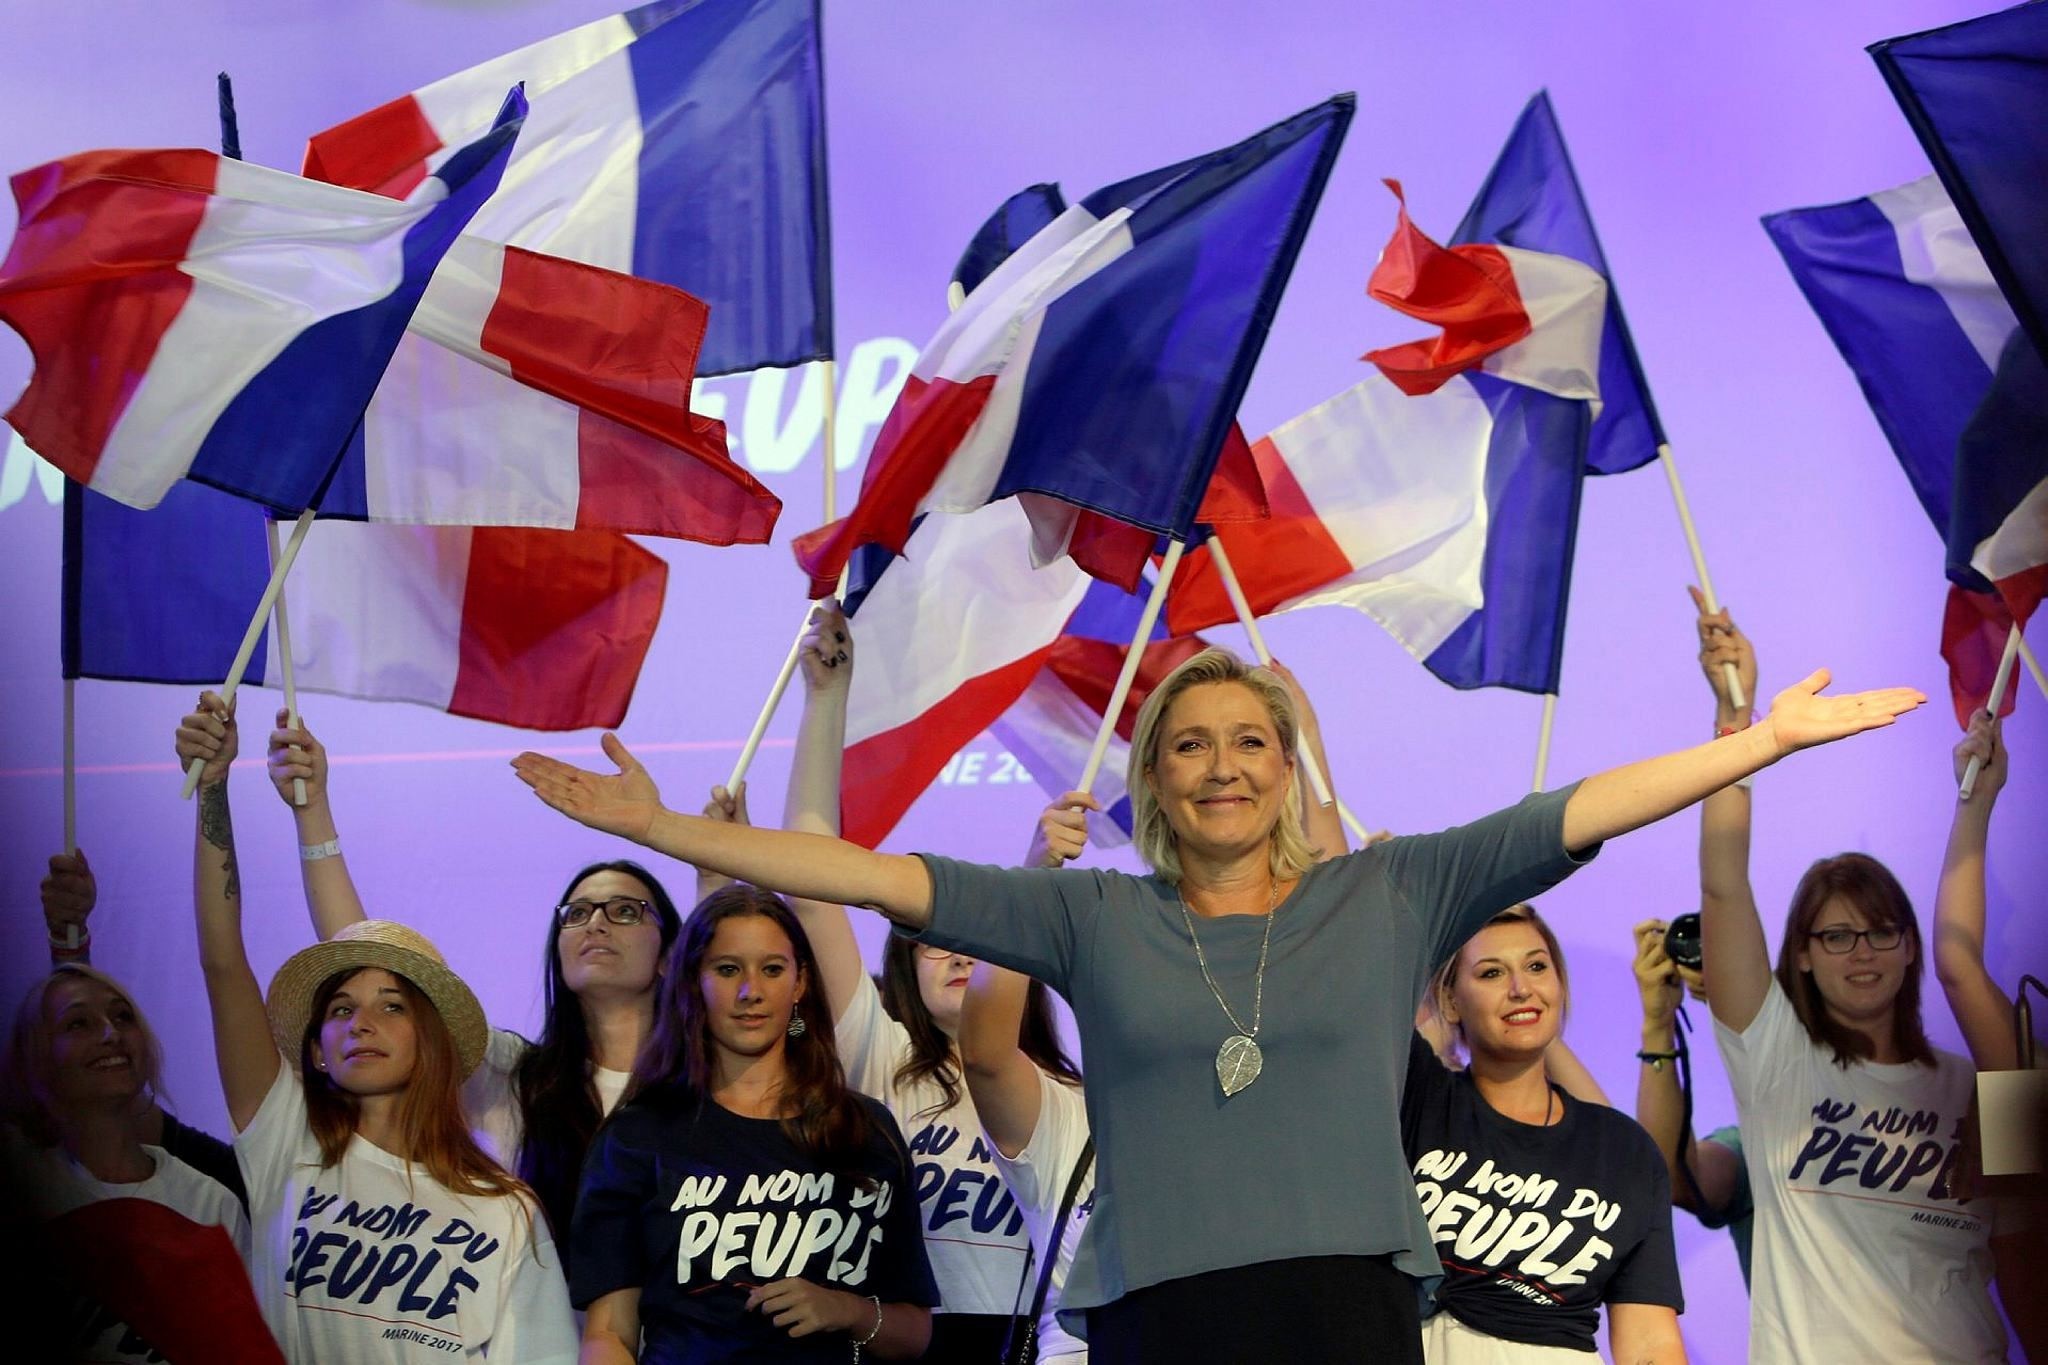 France's far-right National Front president Marine Le Pen waves to supporters during a summer meeting in Frejus, southern France.